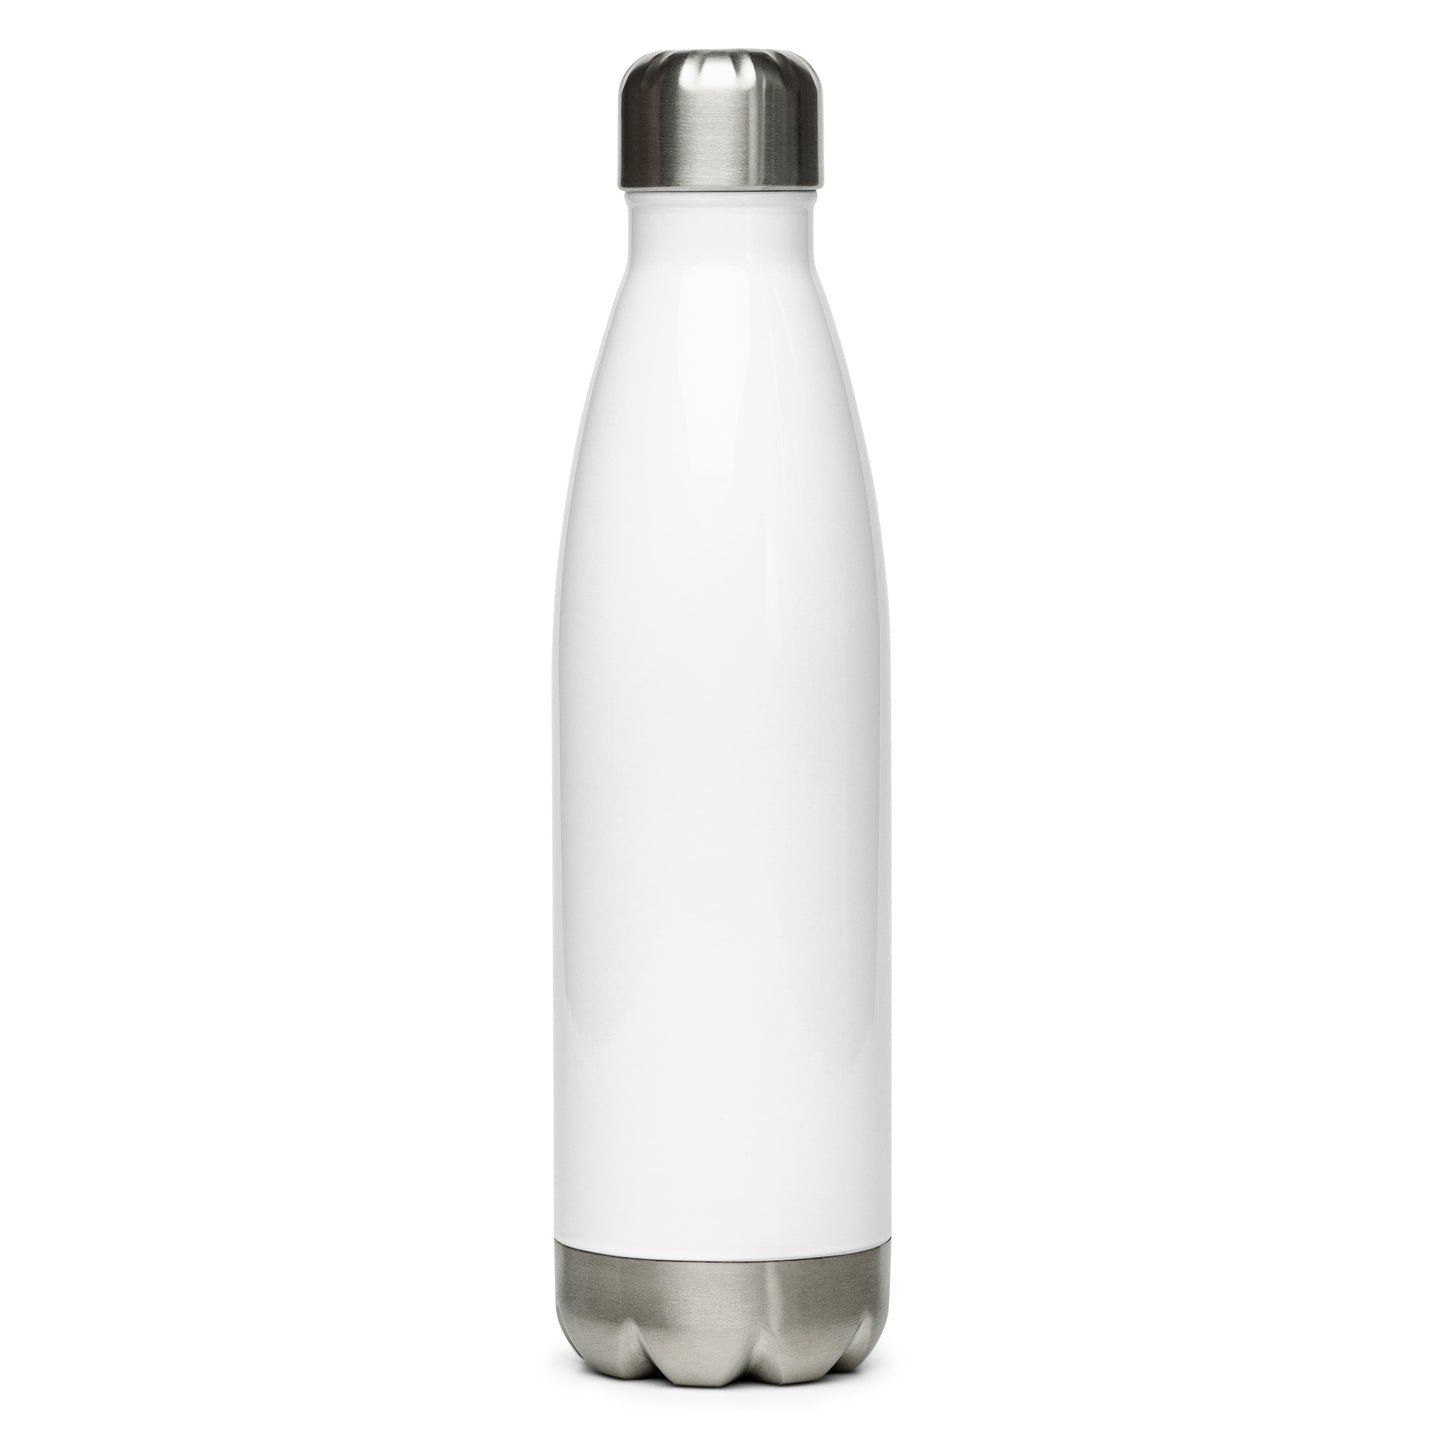 Stainless Steel Water Bottle - Never forget!